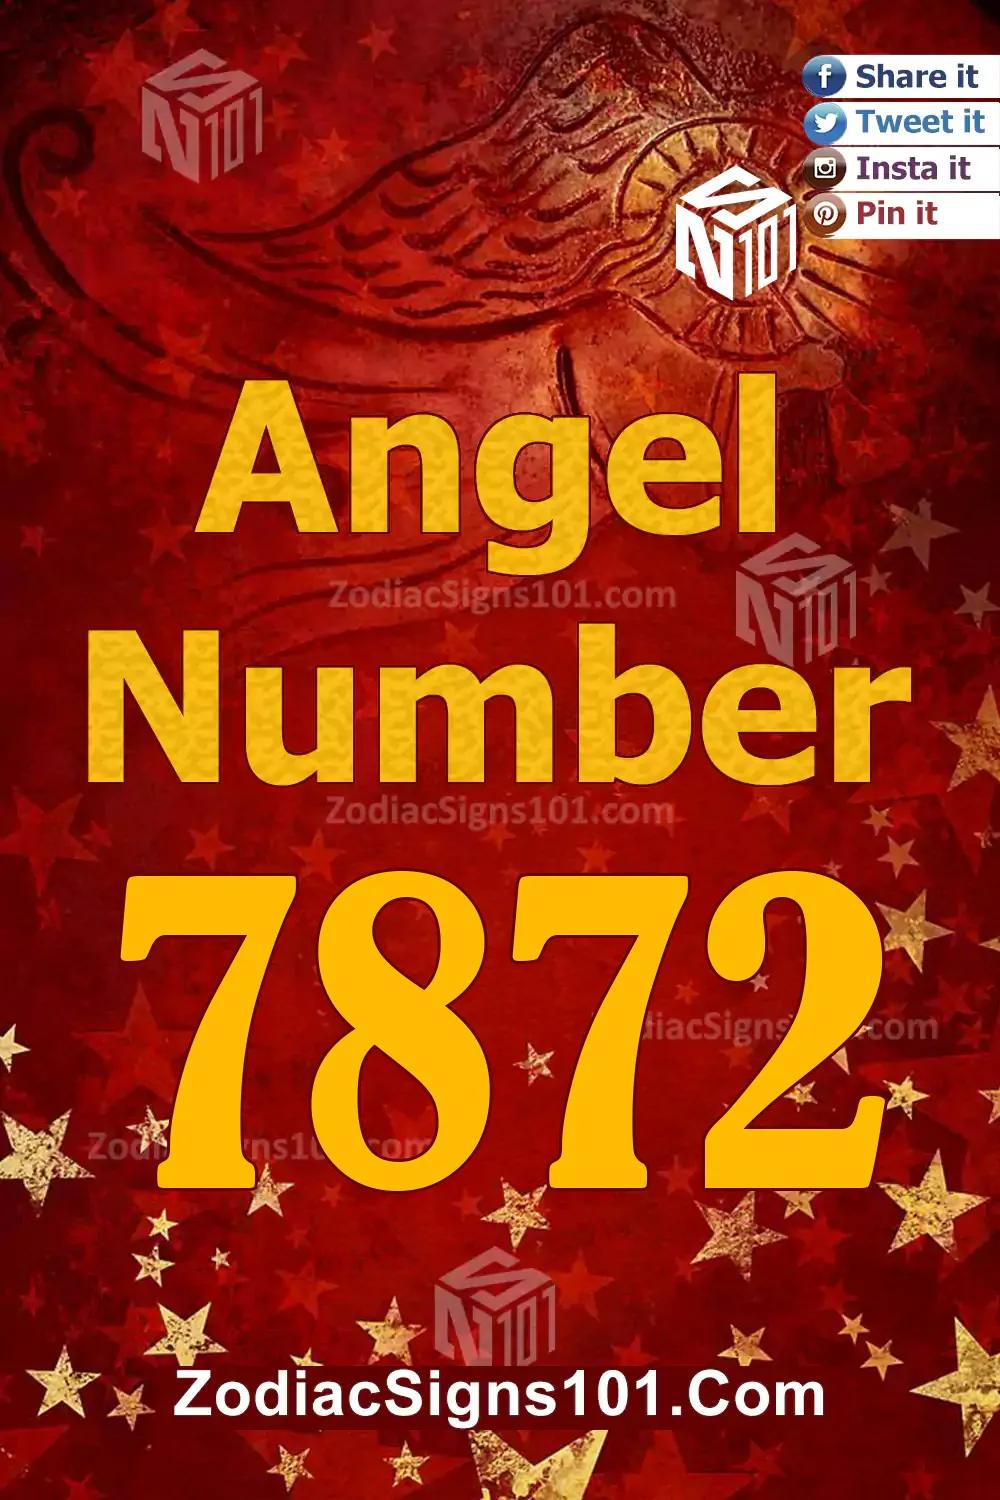 7872 Angel Number Meaning